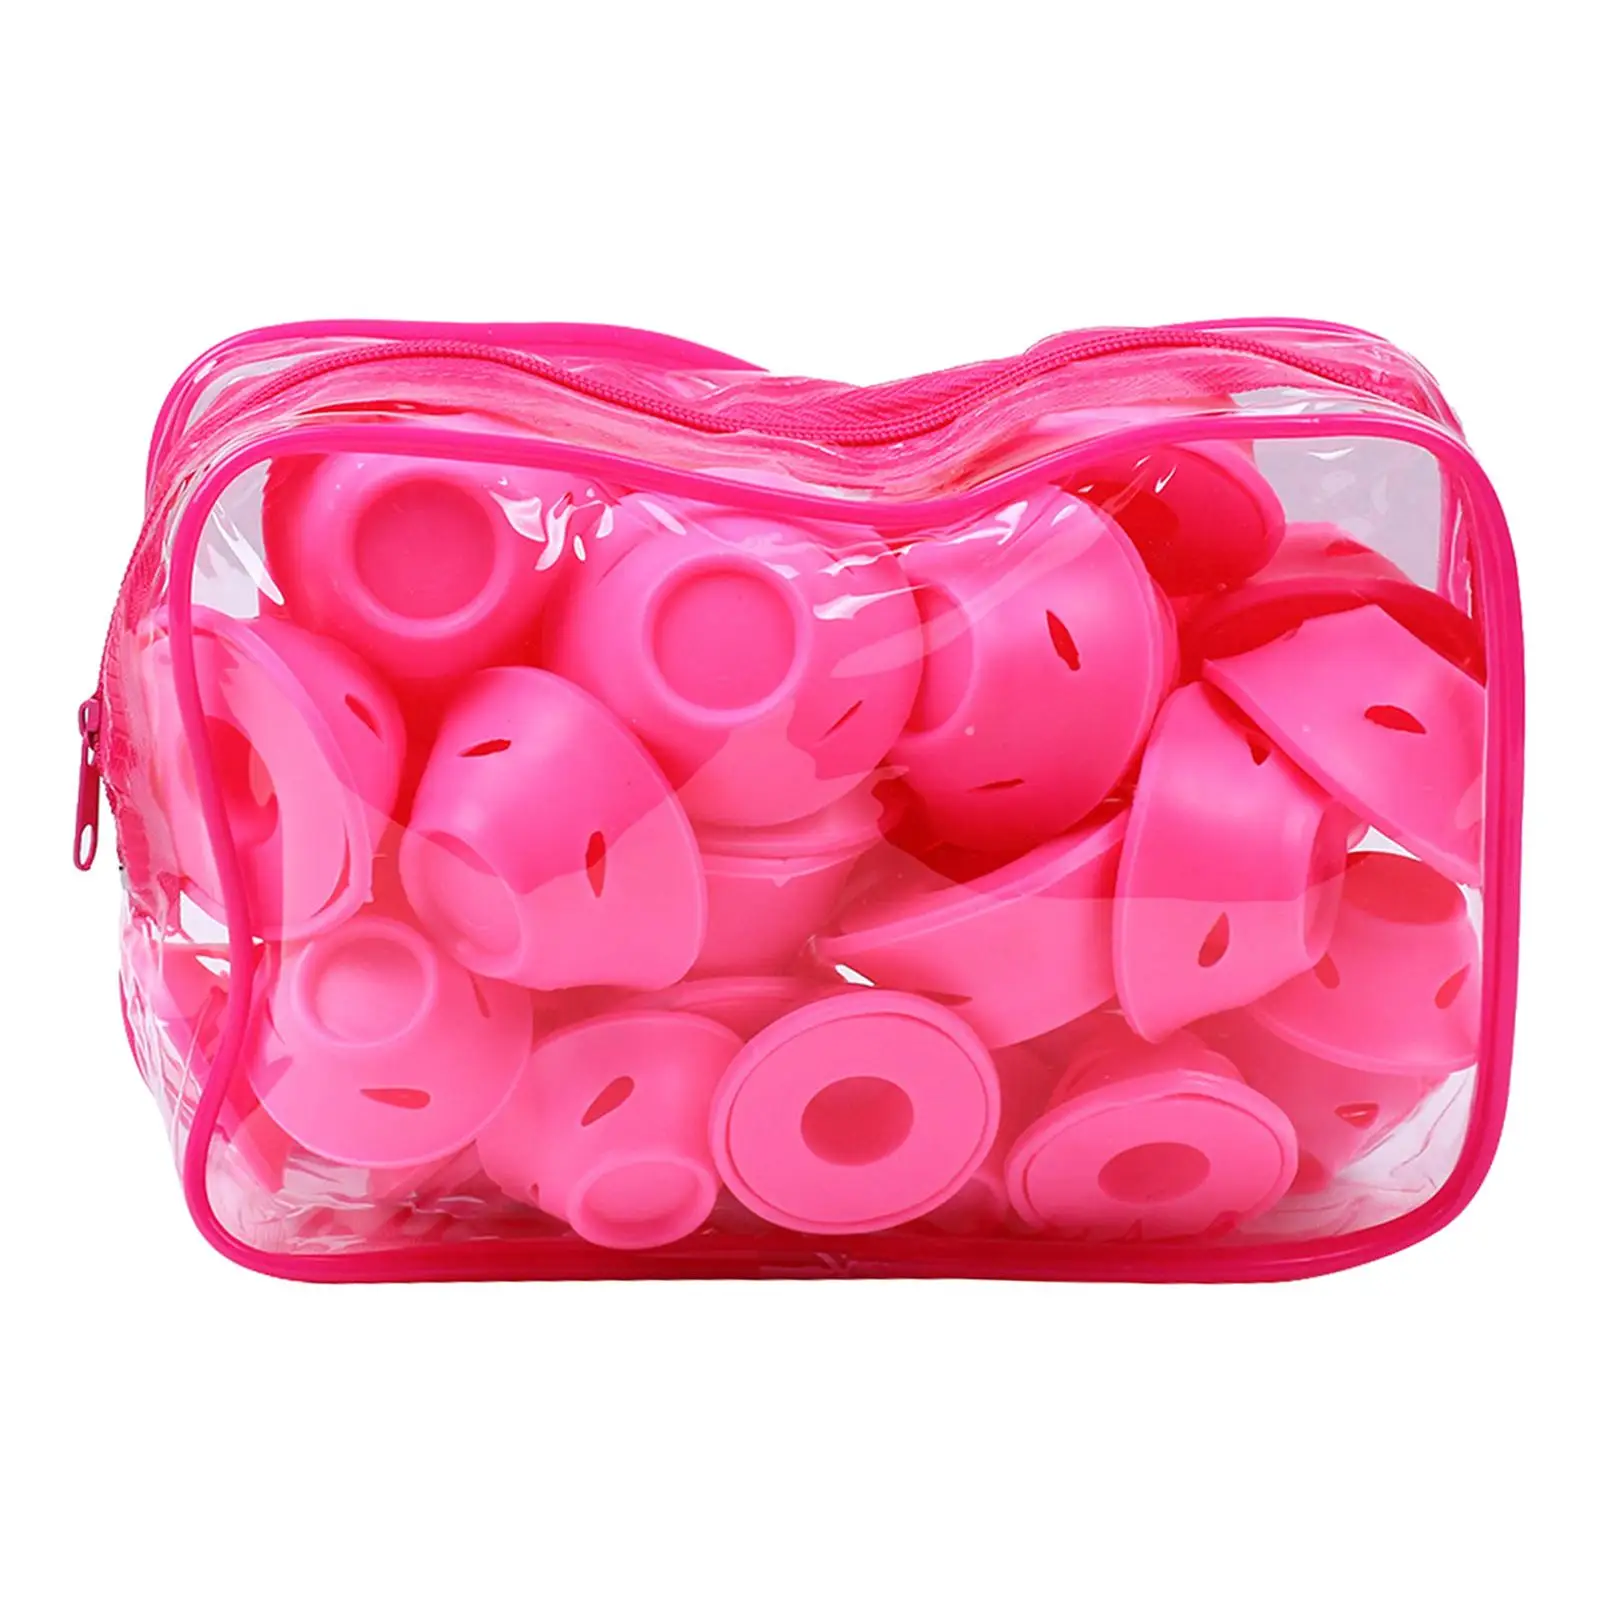 30Pieces Hair Rollers Removable Curls Tool Hair Accessories for Women Girl